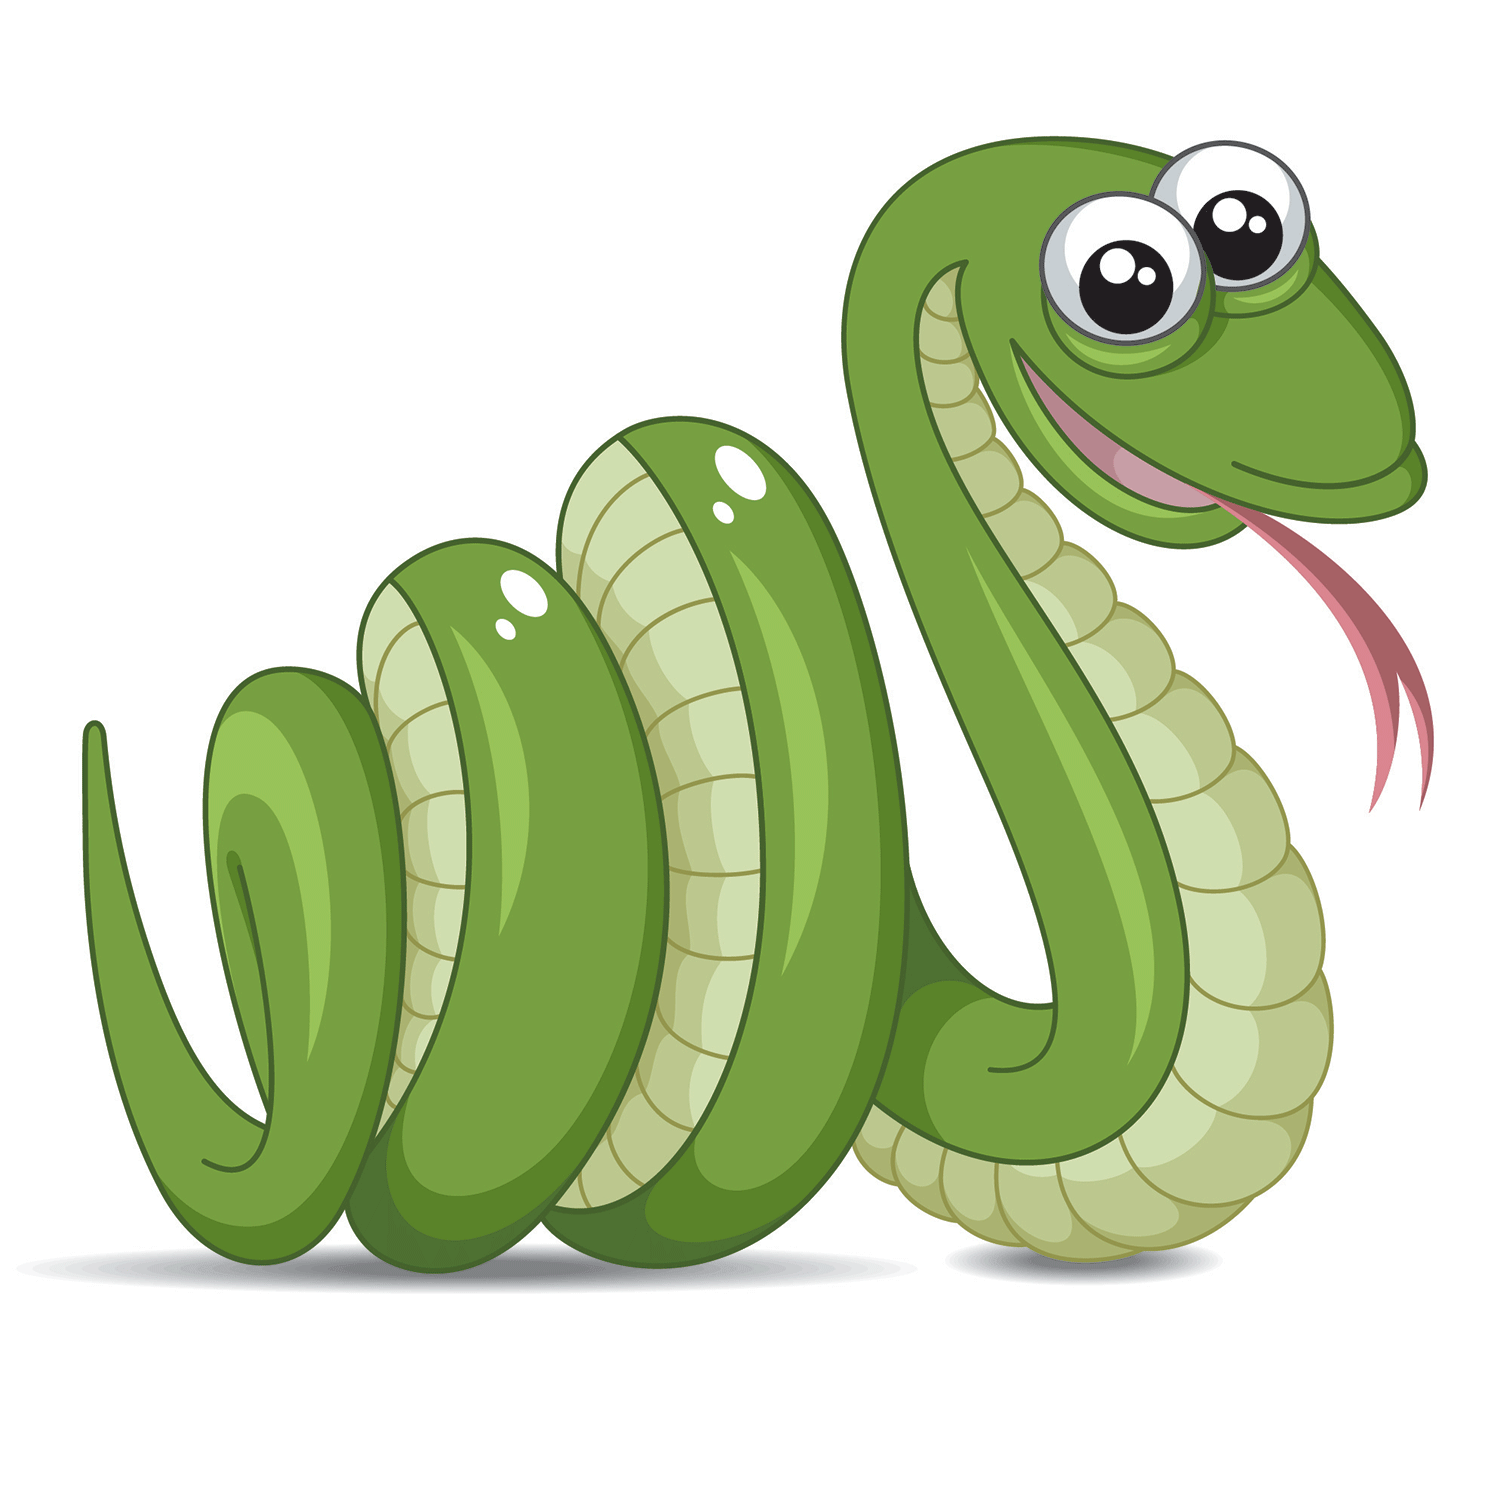 20 Snake Illustrations (Vector & PNG Free Download) for CNY 2013